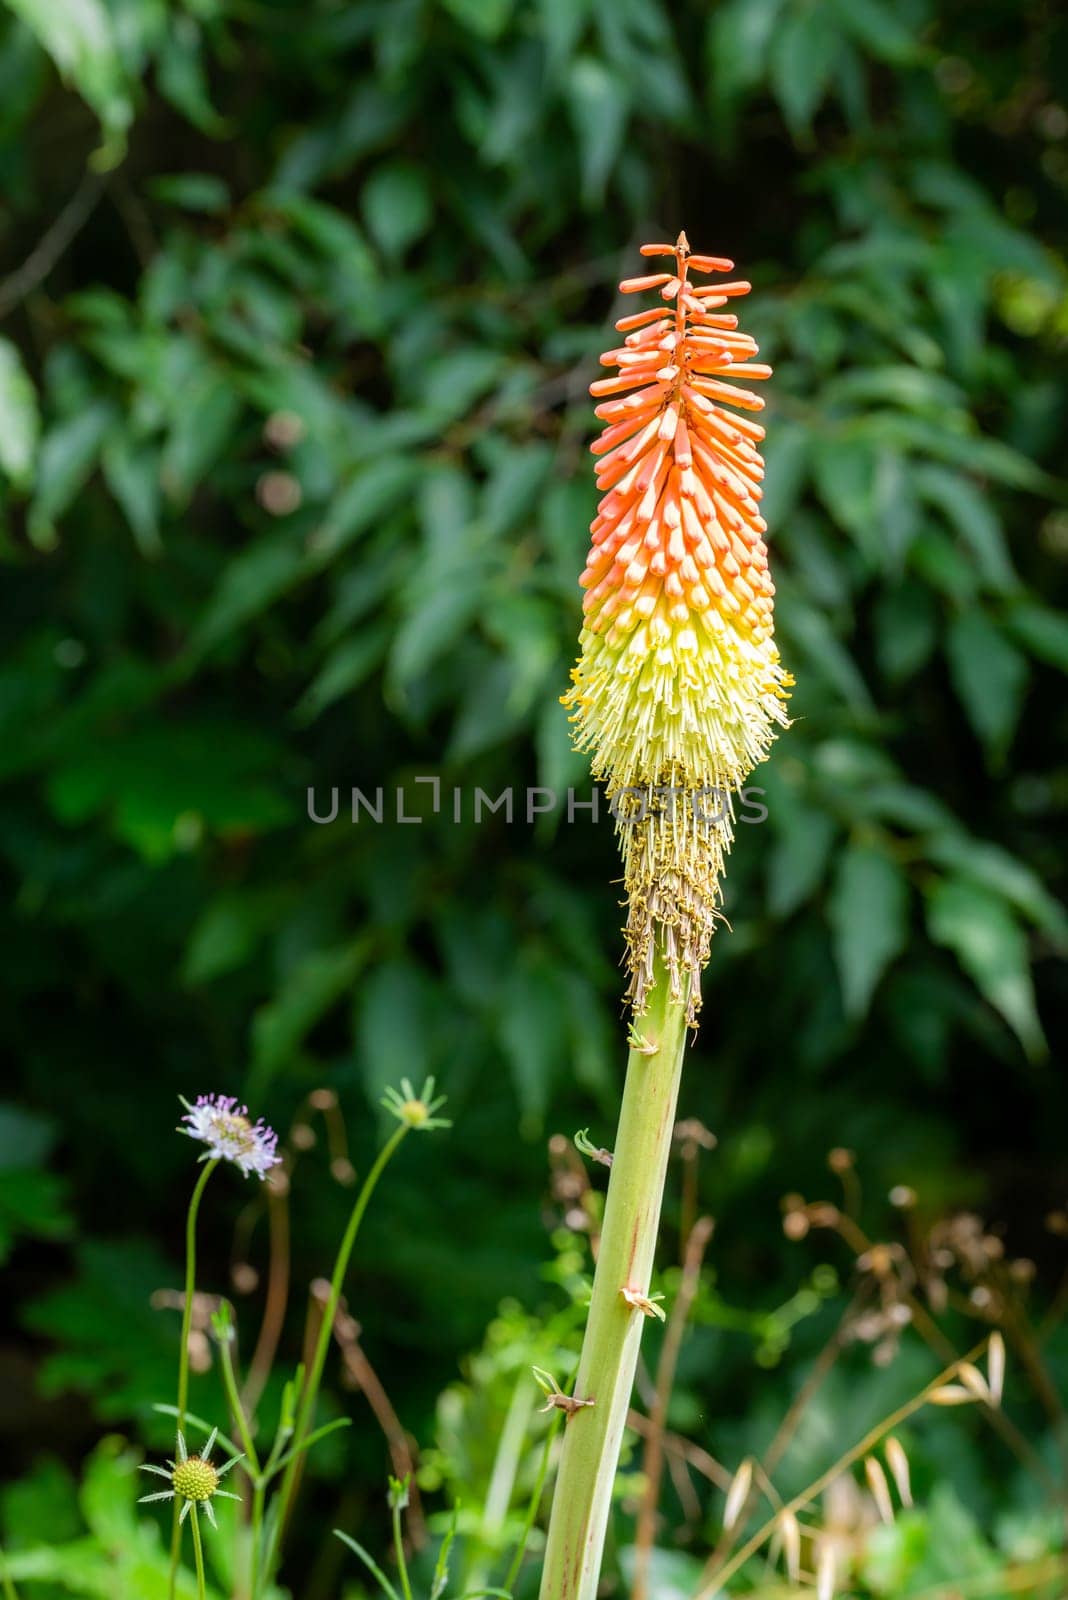 Kniphofia uvaria also known as Bareroot Red Hot Poker, torch lily, poker plant, under the summer sun in the Frence Provence